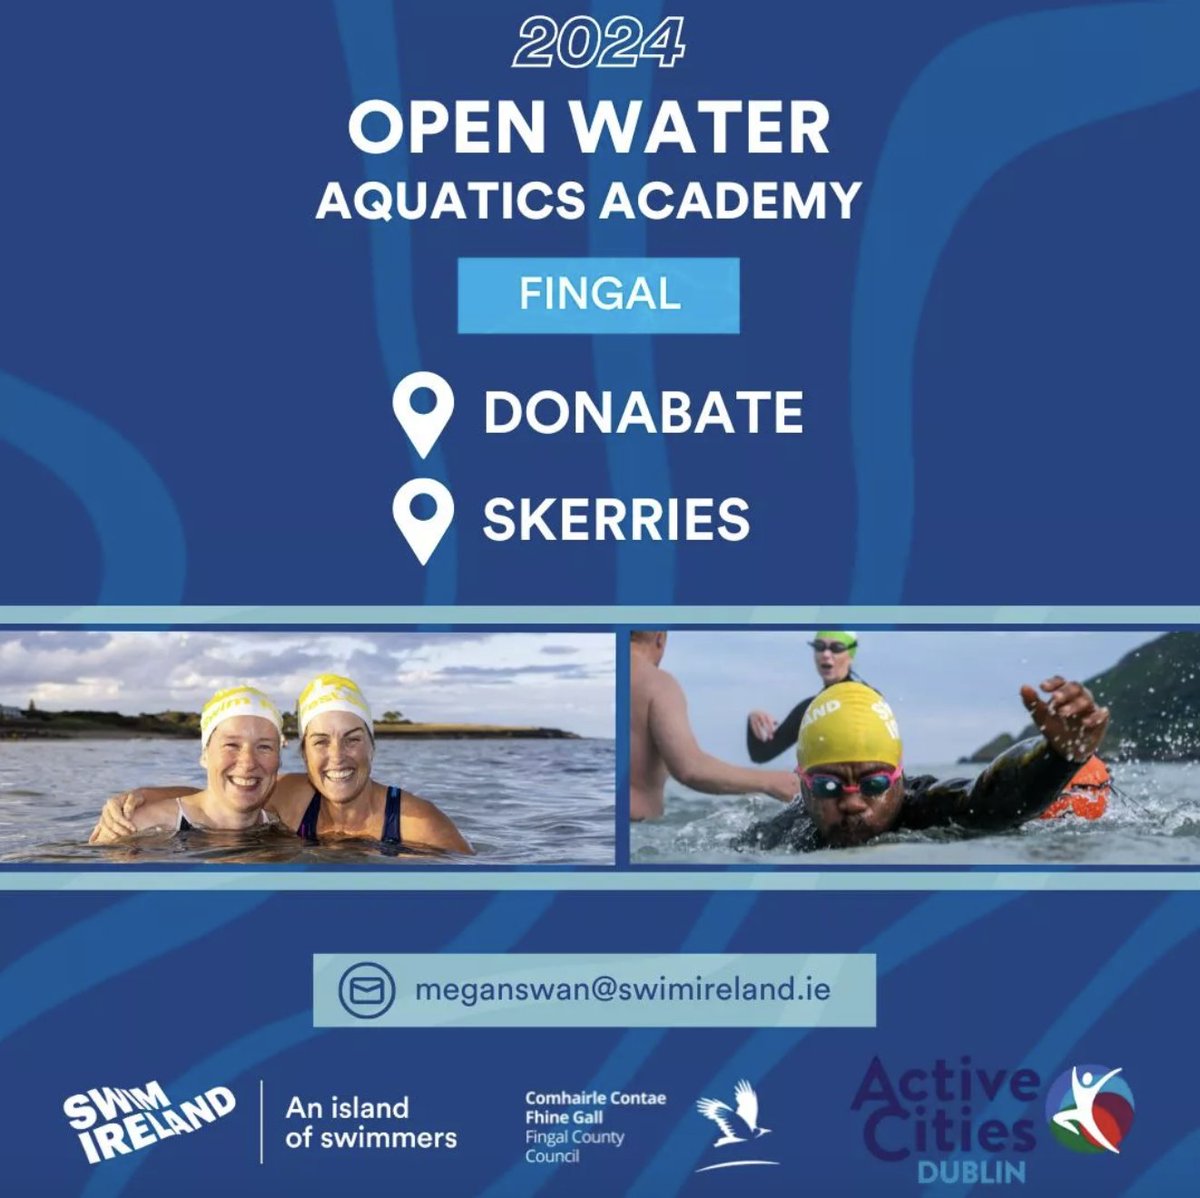 Join us this Summer as we dive into the Open Water with our Open Water Aquatics Academy Programmes. 🏊‍♀️ Time: 6pm-8pm on Thurs Location 1: Skerries Beach Duration 1: 5 weeks, May 30 Location 2: Donabate Beach Duration 2: 5 weeks, July 6 app.joinin.online/#/app/joinin/o… @swimireland